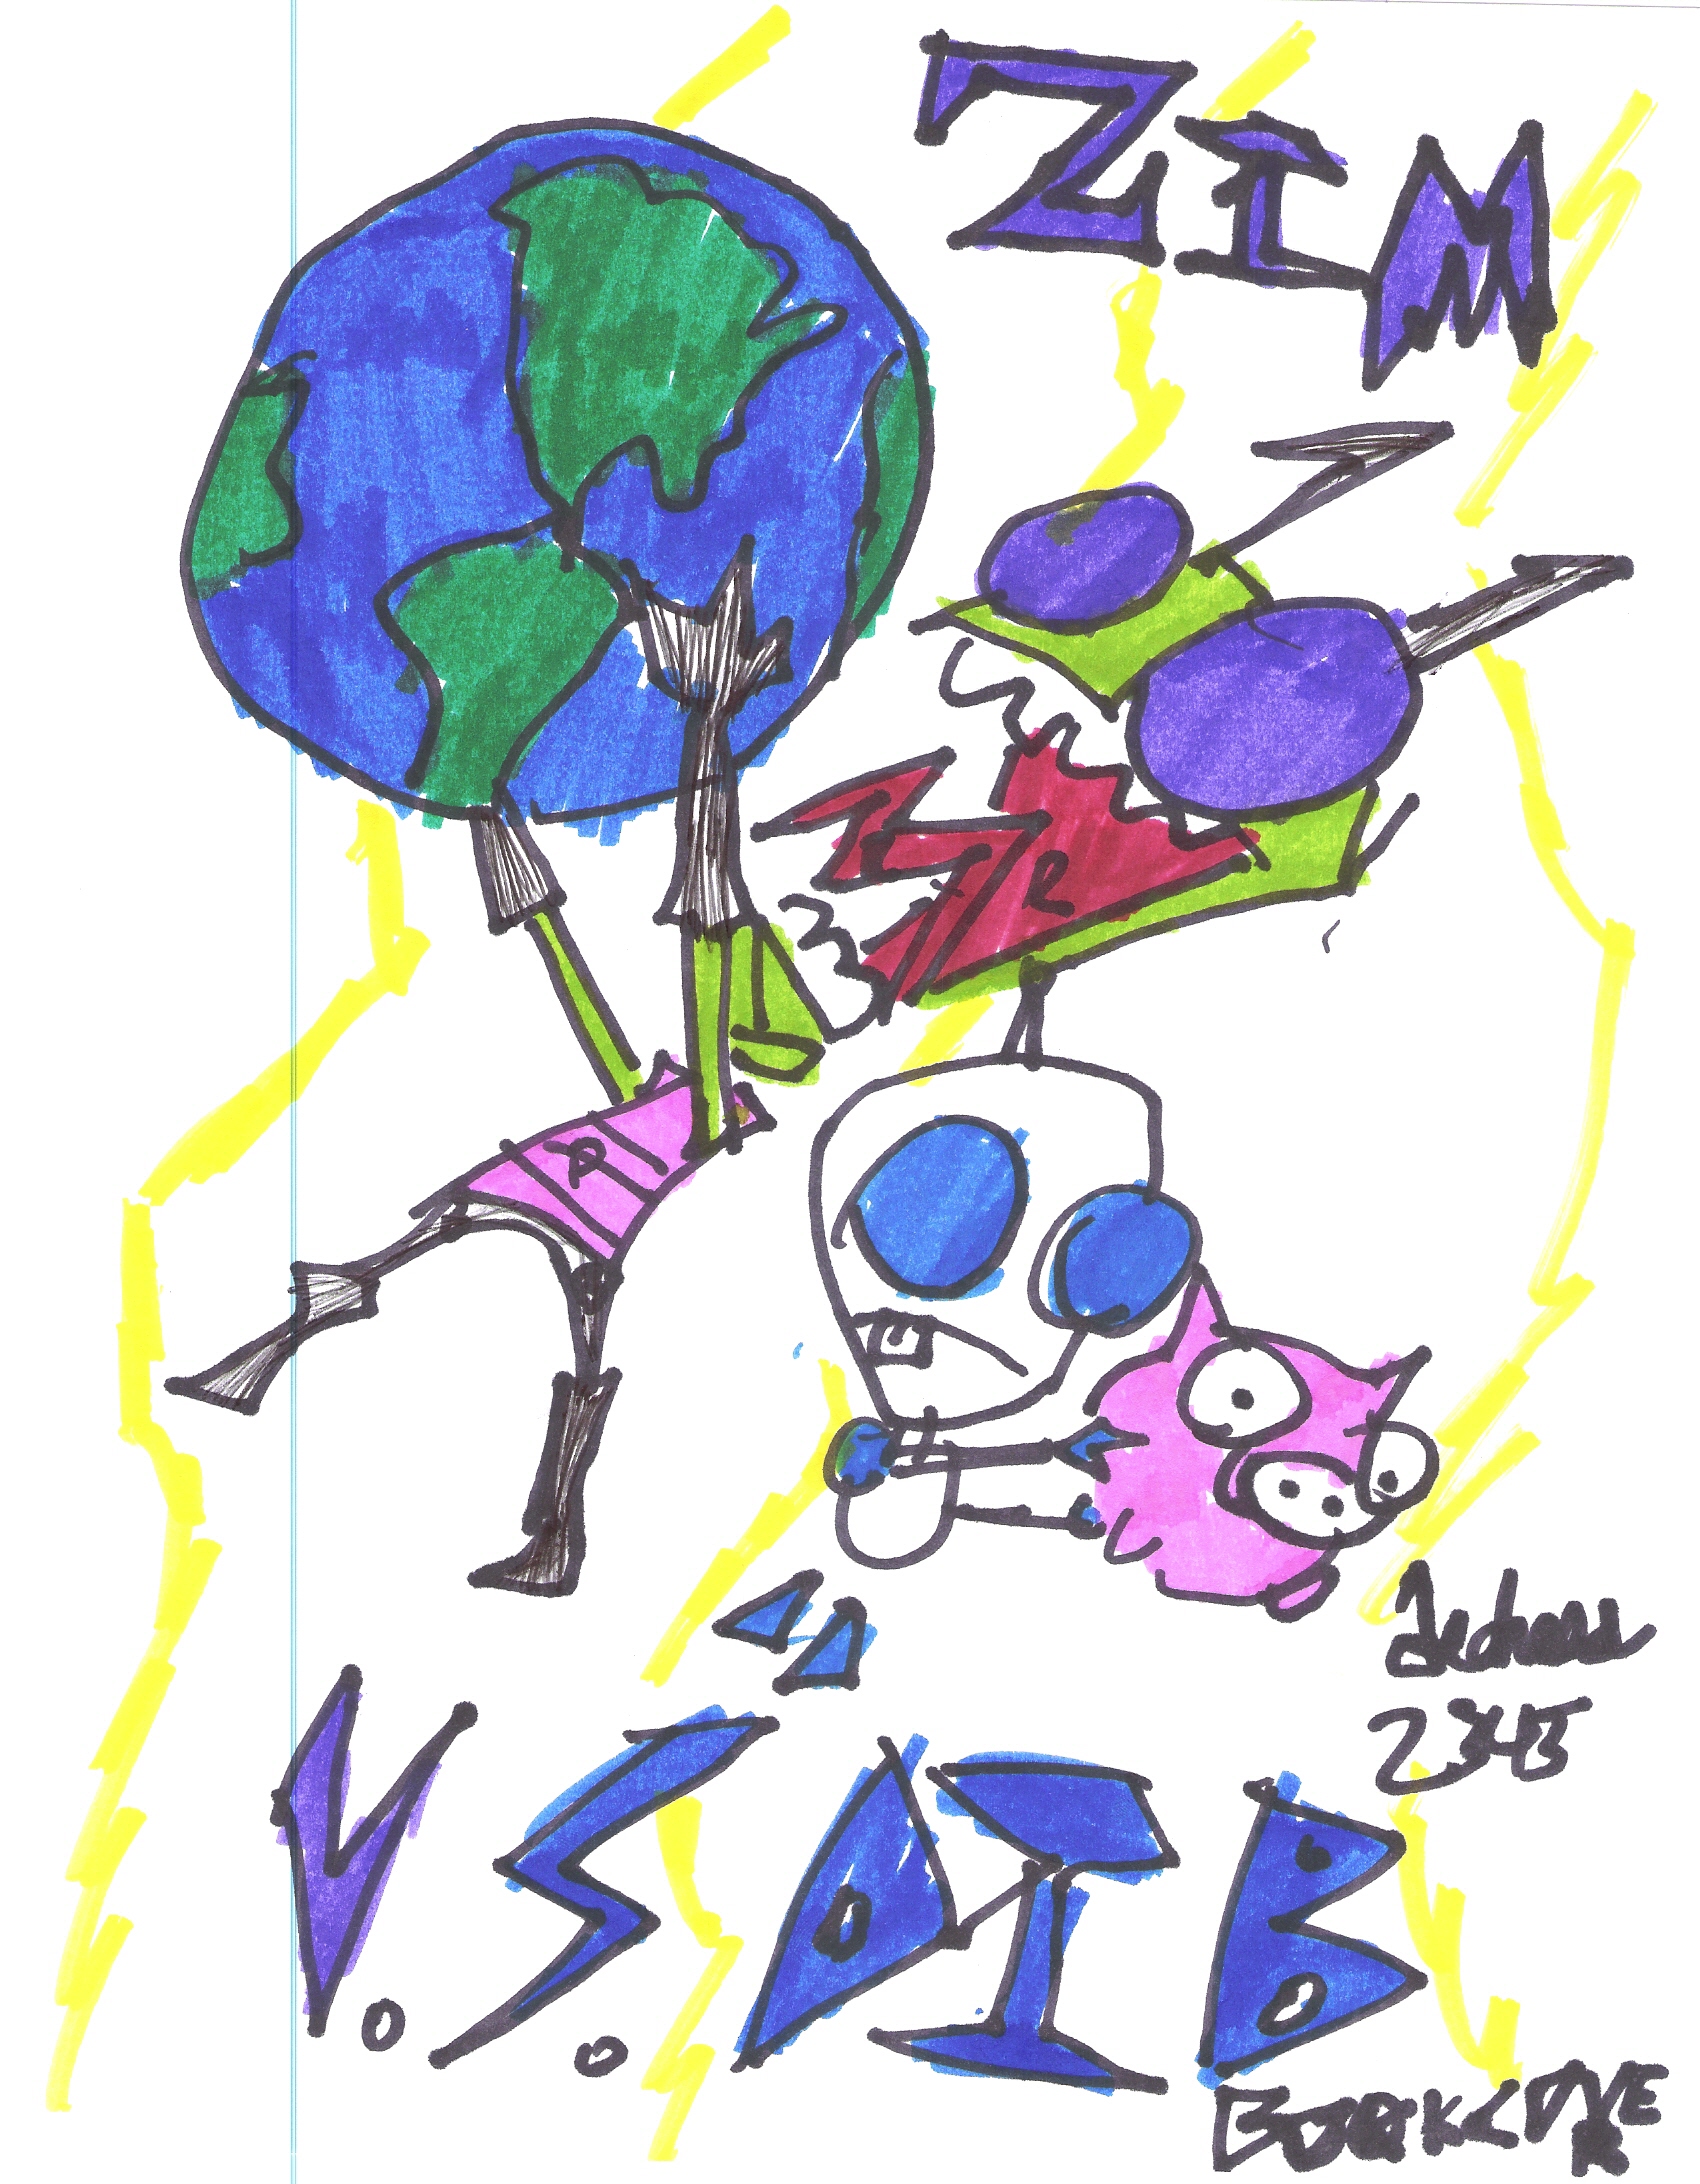 Invader Zim Comic Book Cover by tedness2345